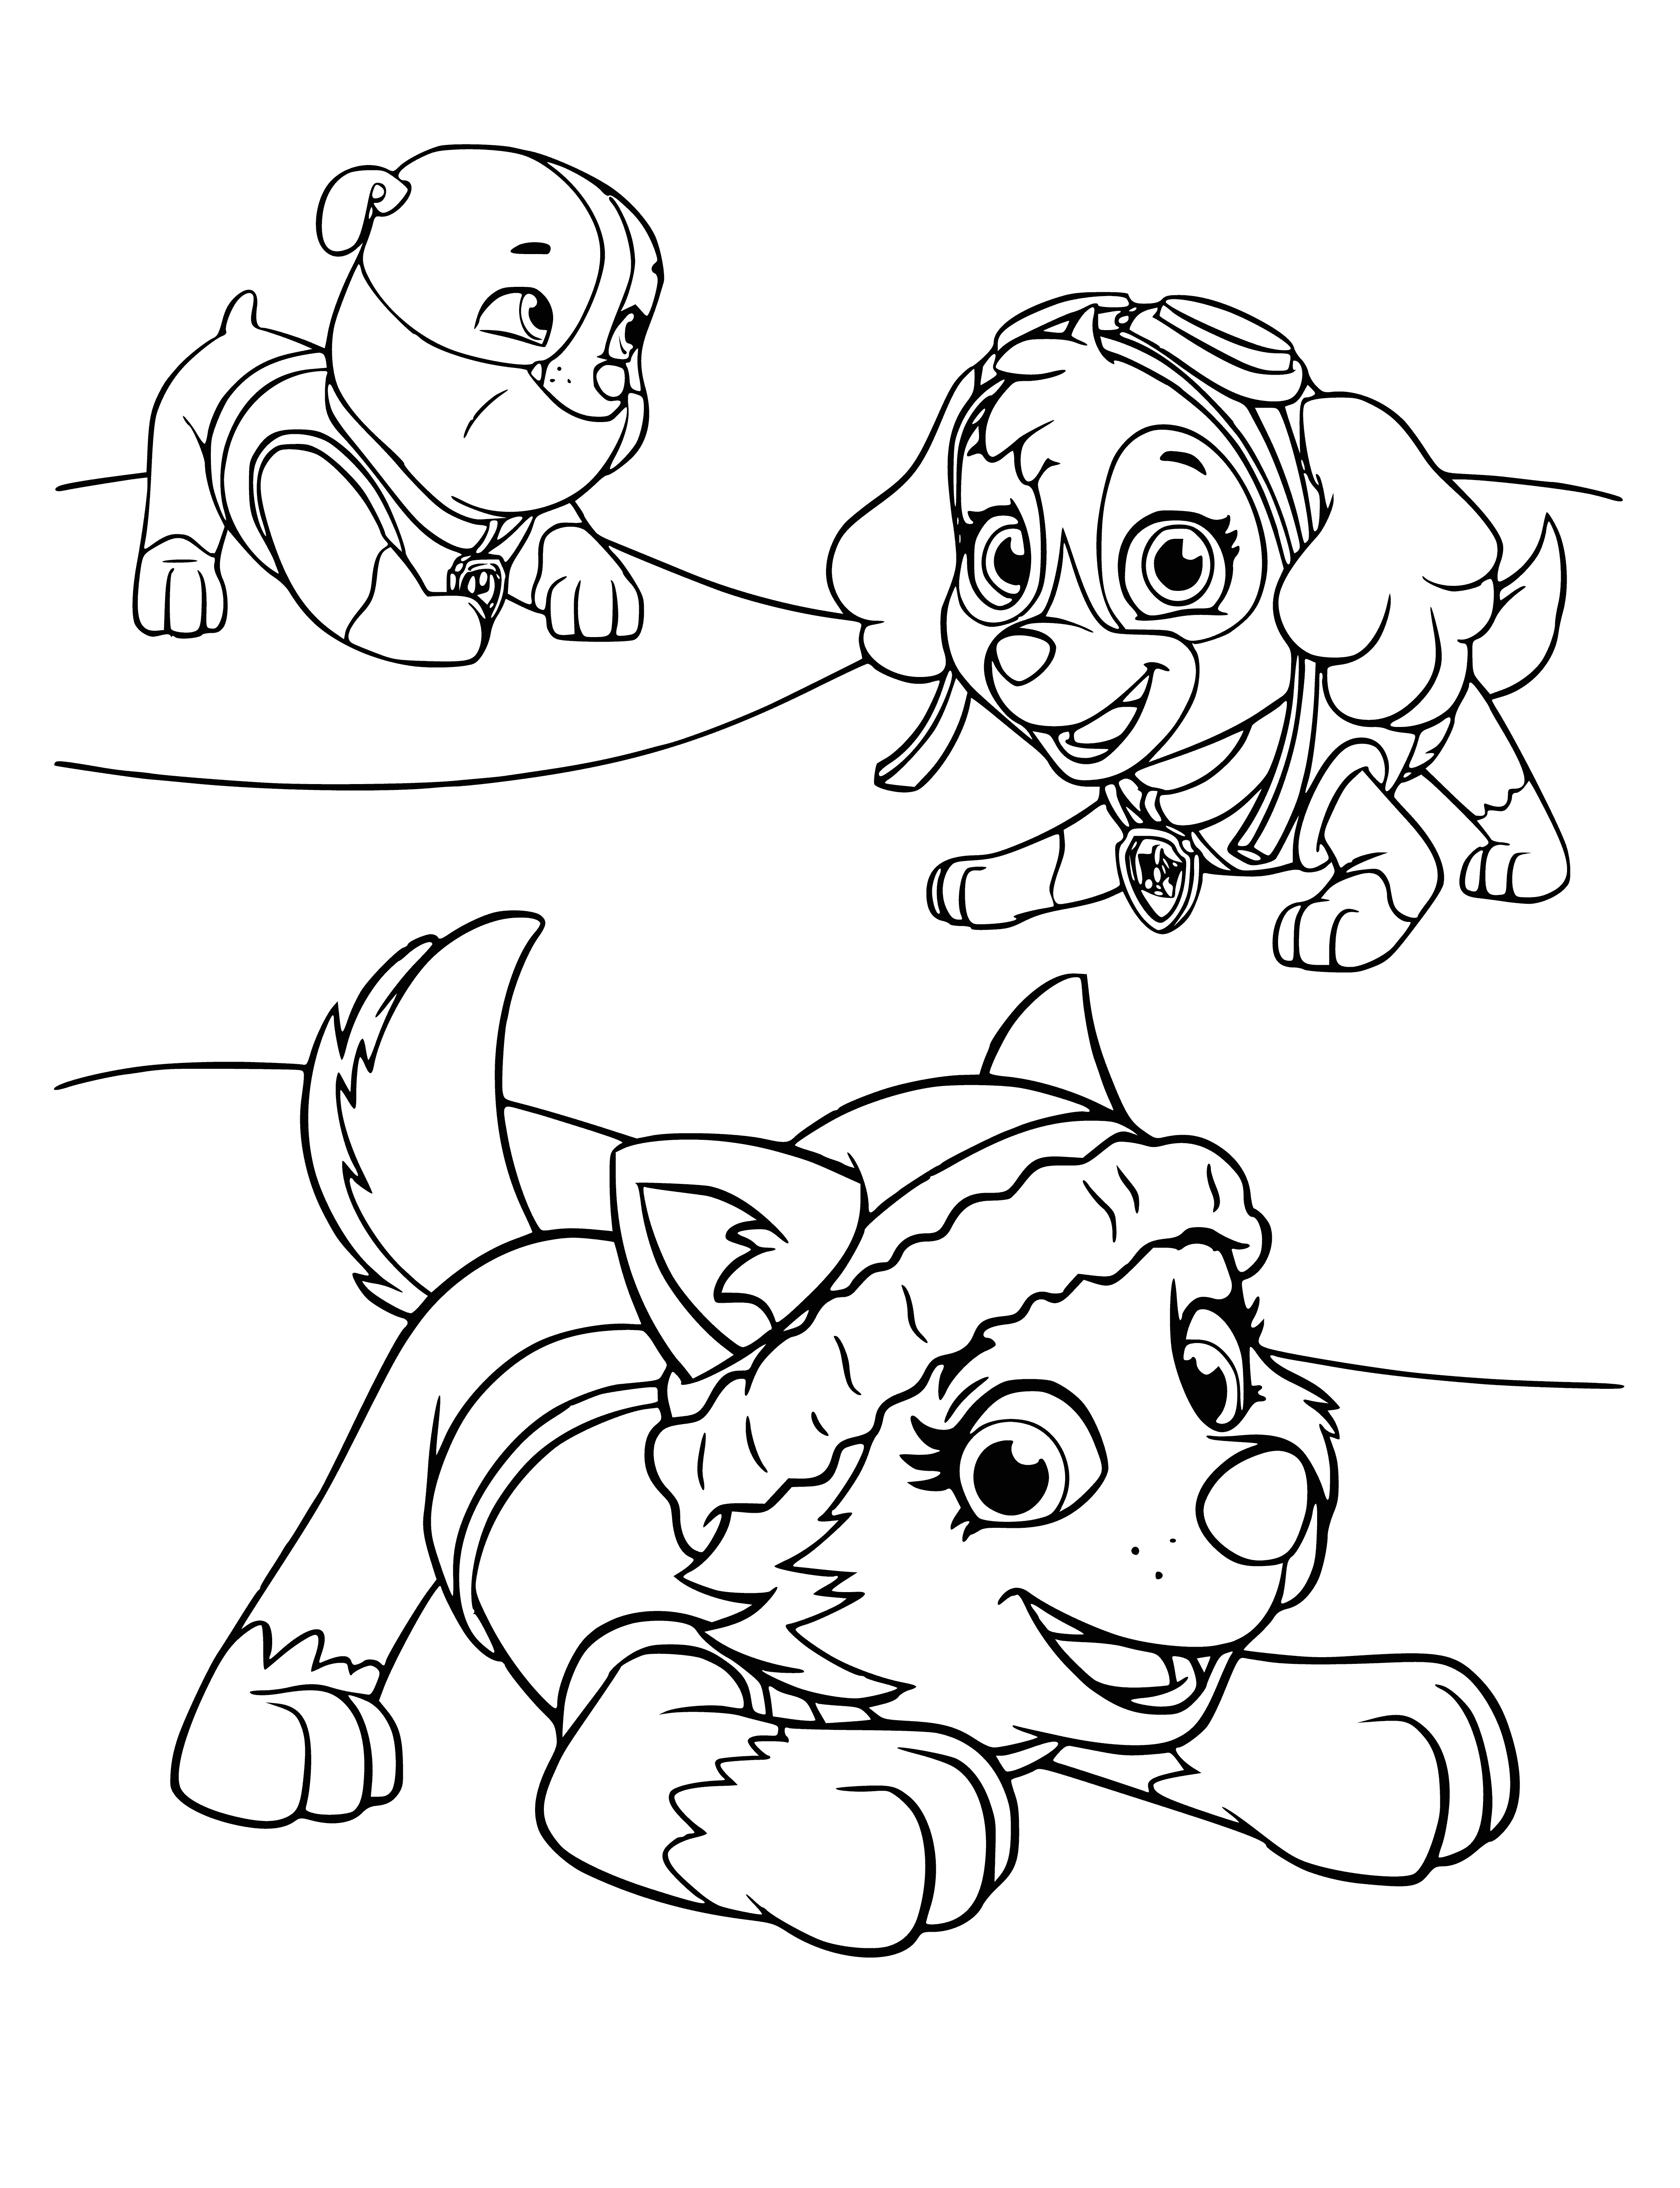 Strongman, Skye and Everest coloring page